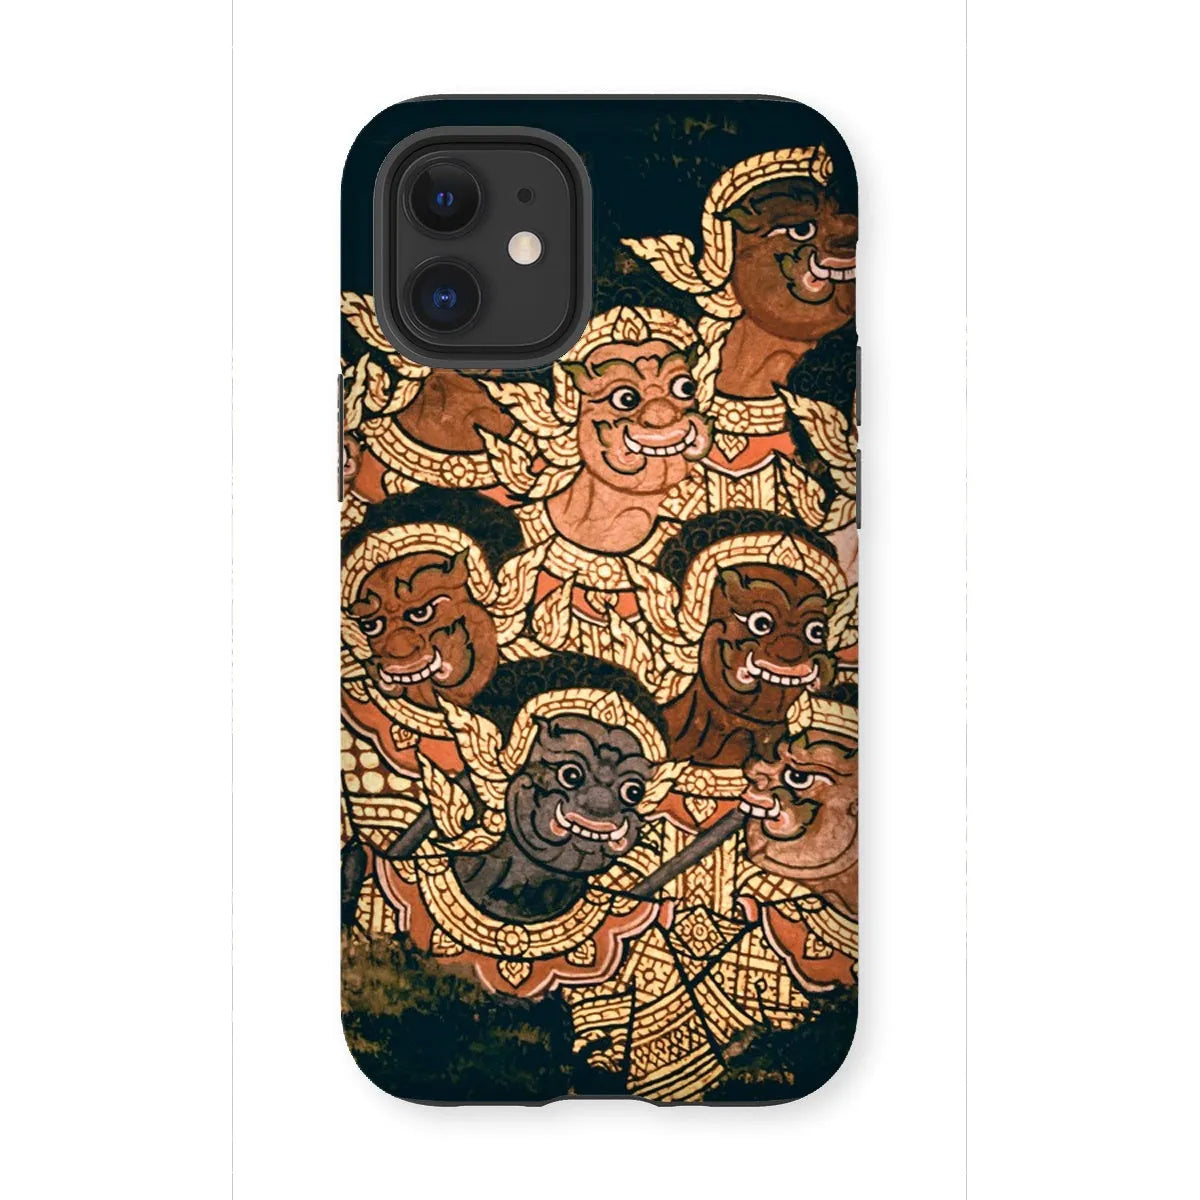 Babes In The Woods - Traditional Thai Myth Phone Case - Iphone 12 Mini / Matte - Mobile Phone Cases - Aesthetic Art